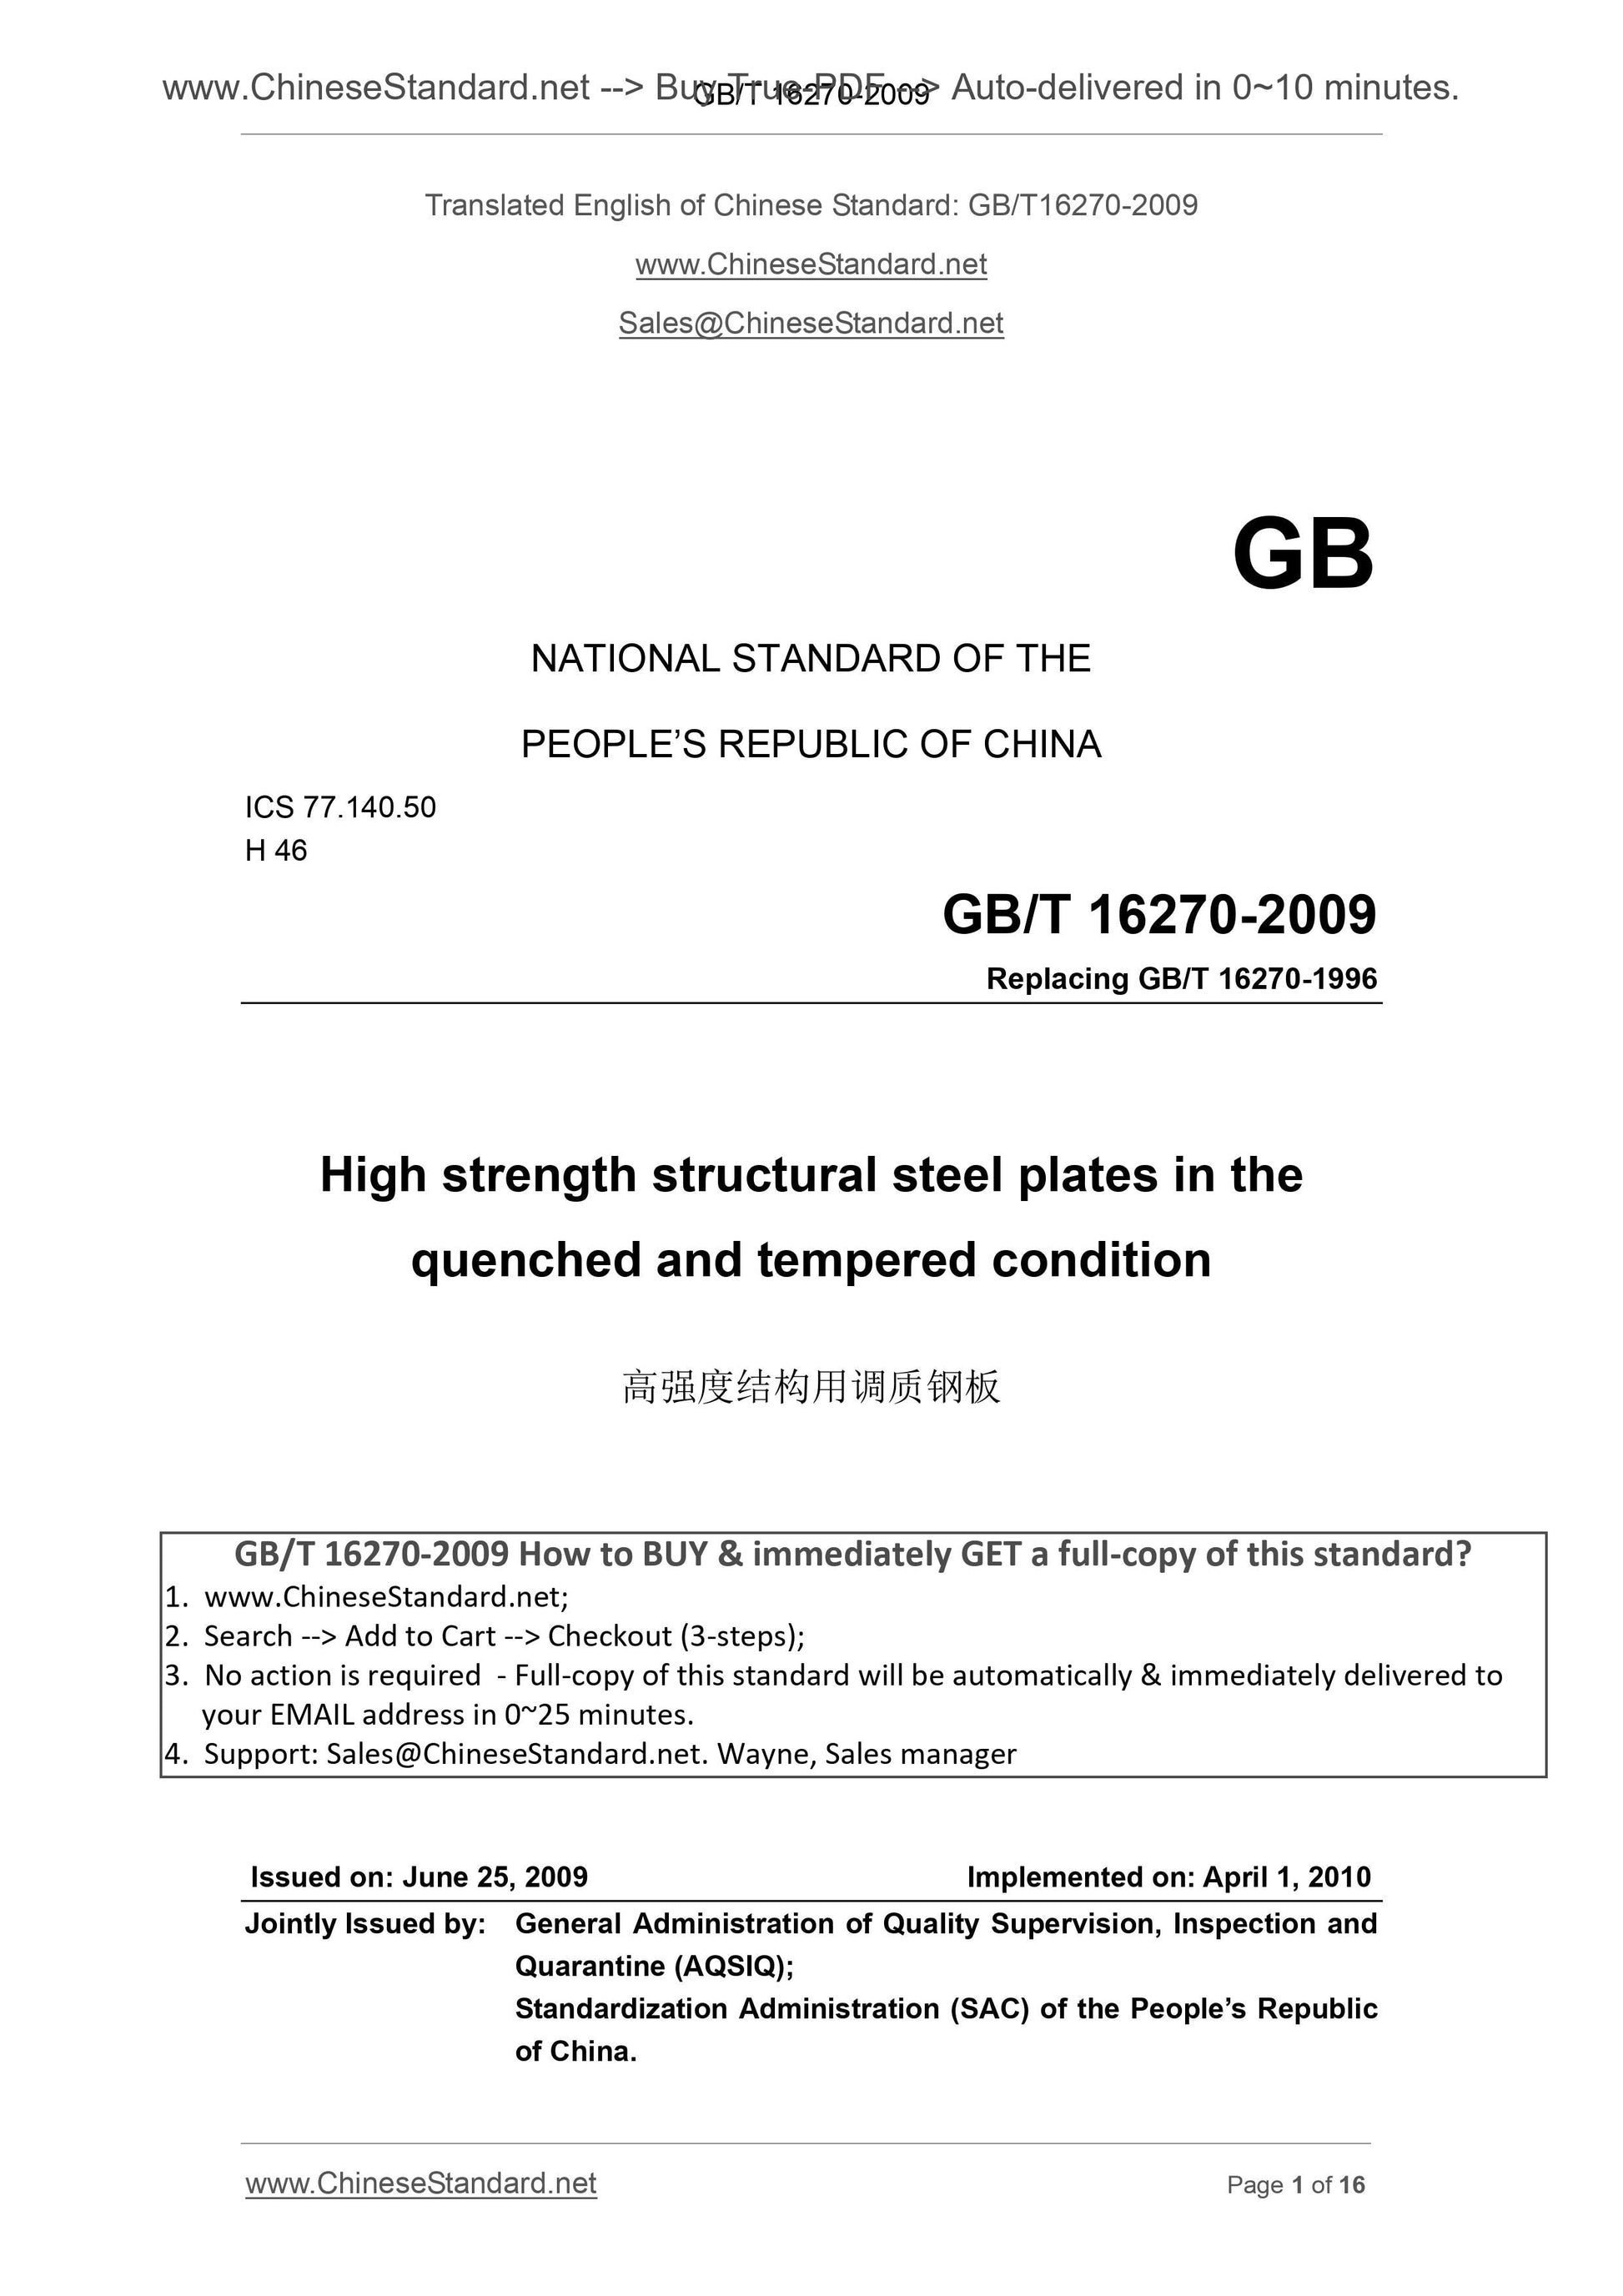 GB/T 16270-2009 Page 1